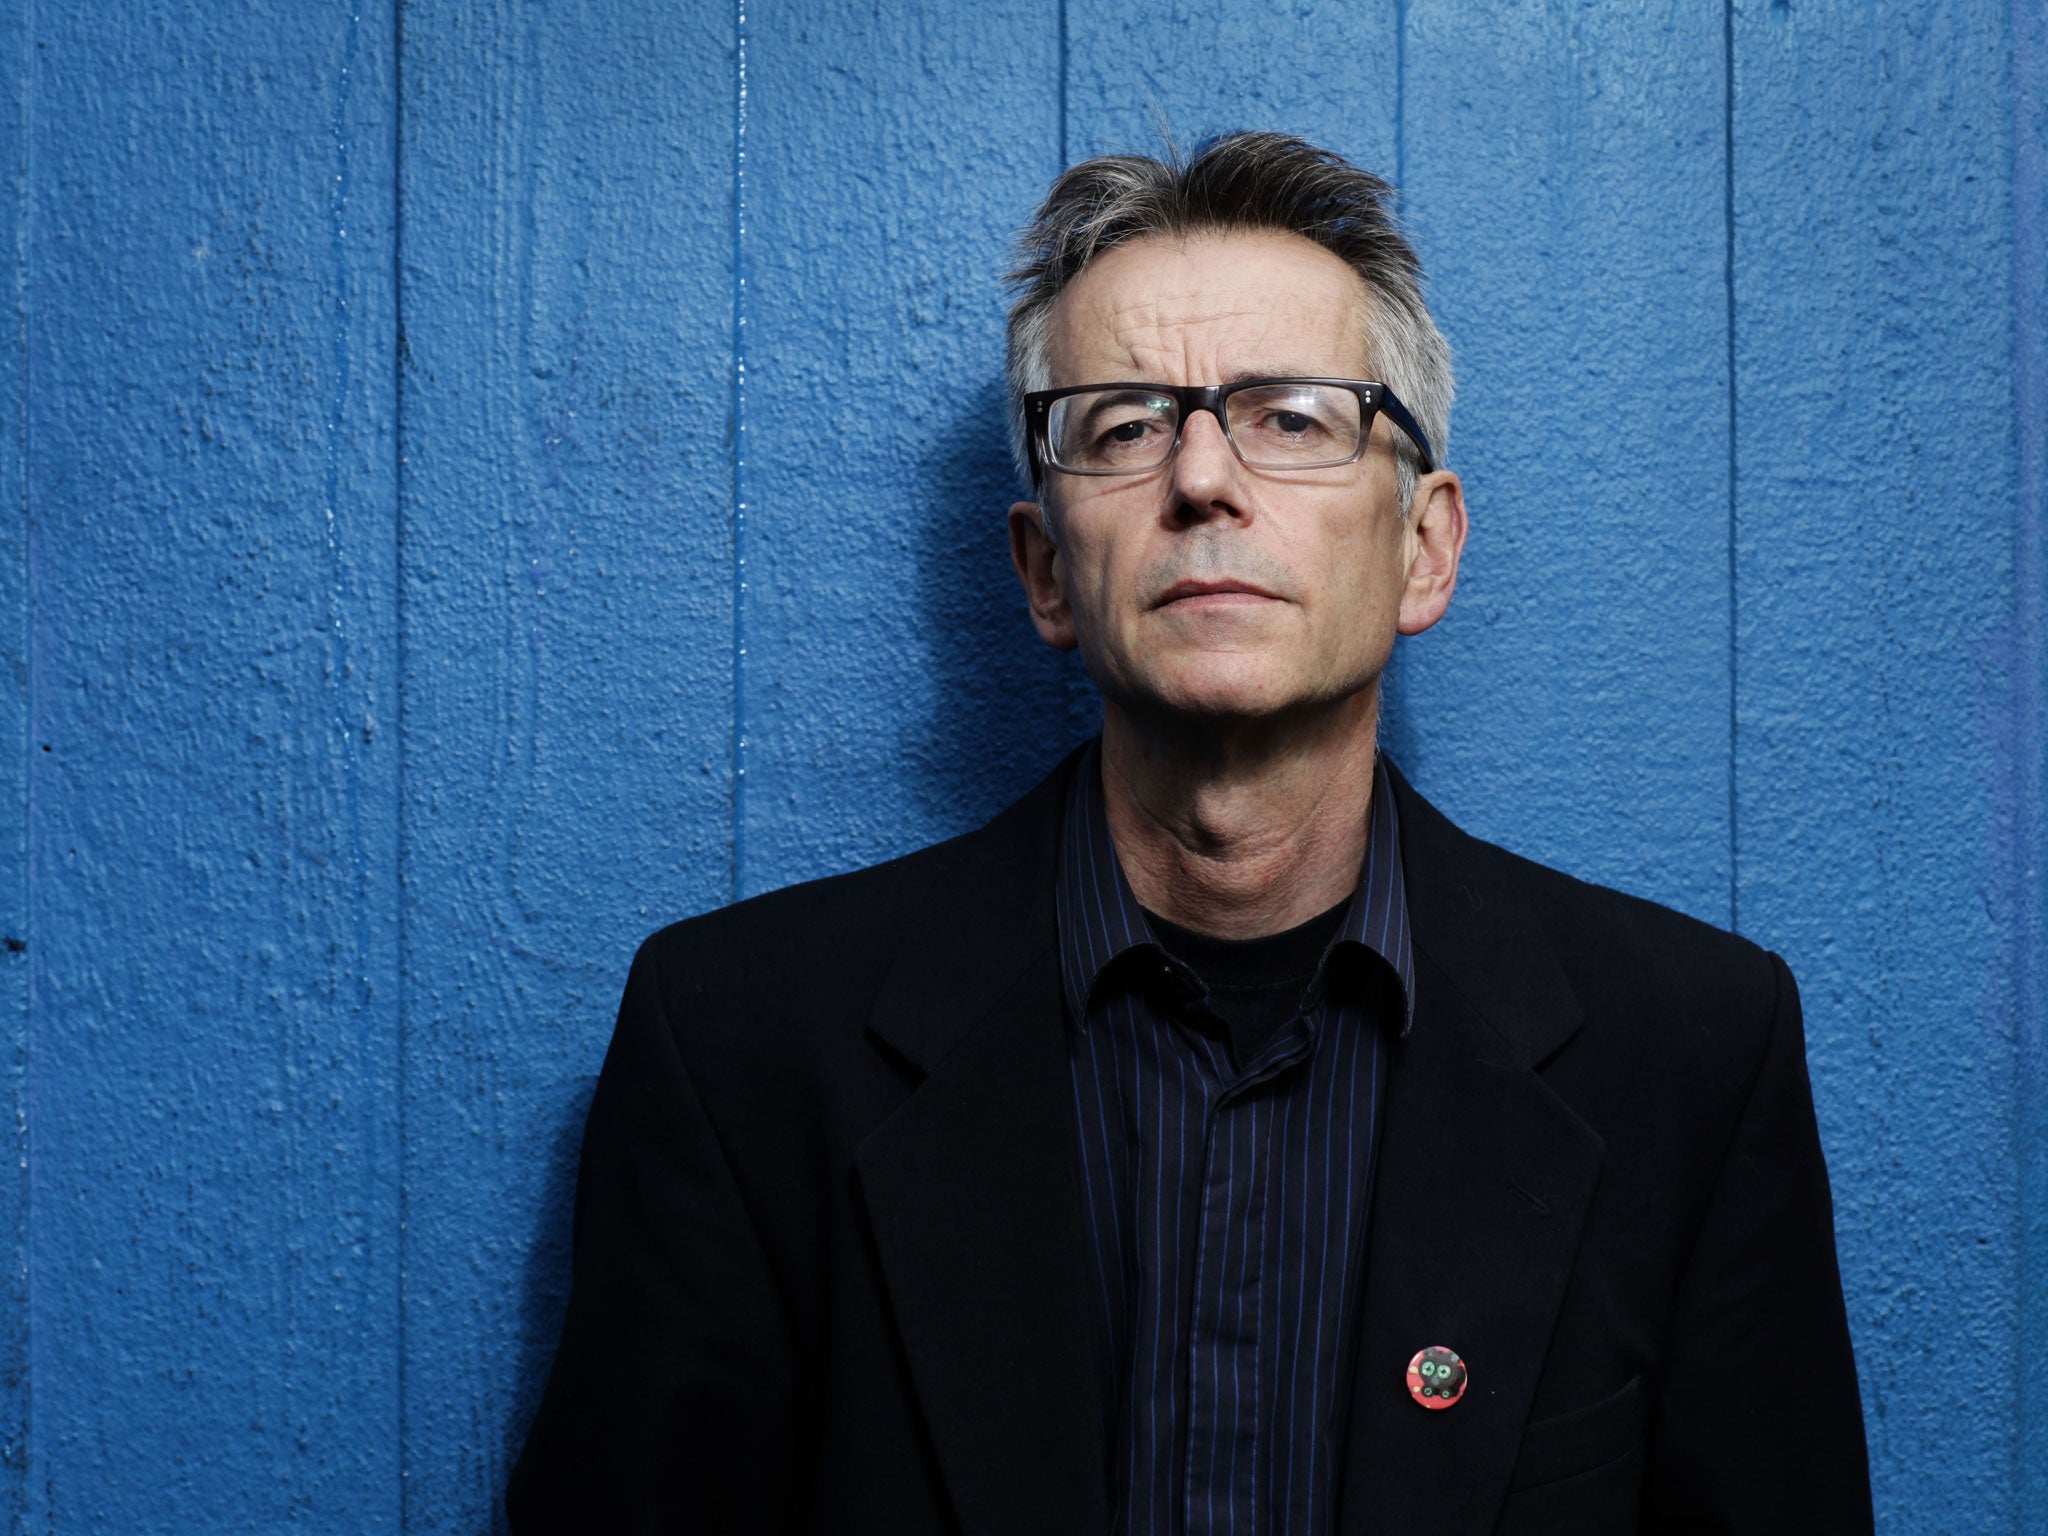 Rhyme and reason : John Hegley’s poems are intellectually satisfying, sometimes didactic, and poignant, not just clever wordplays